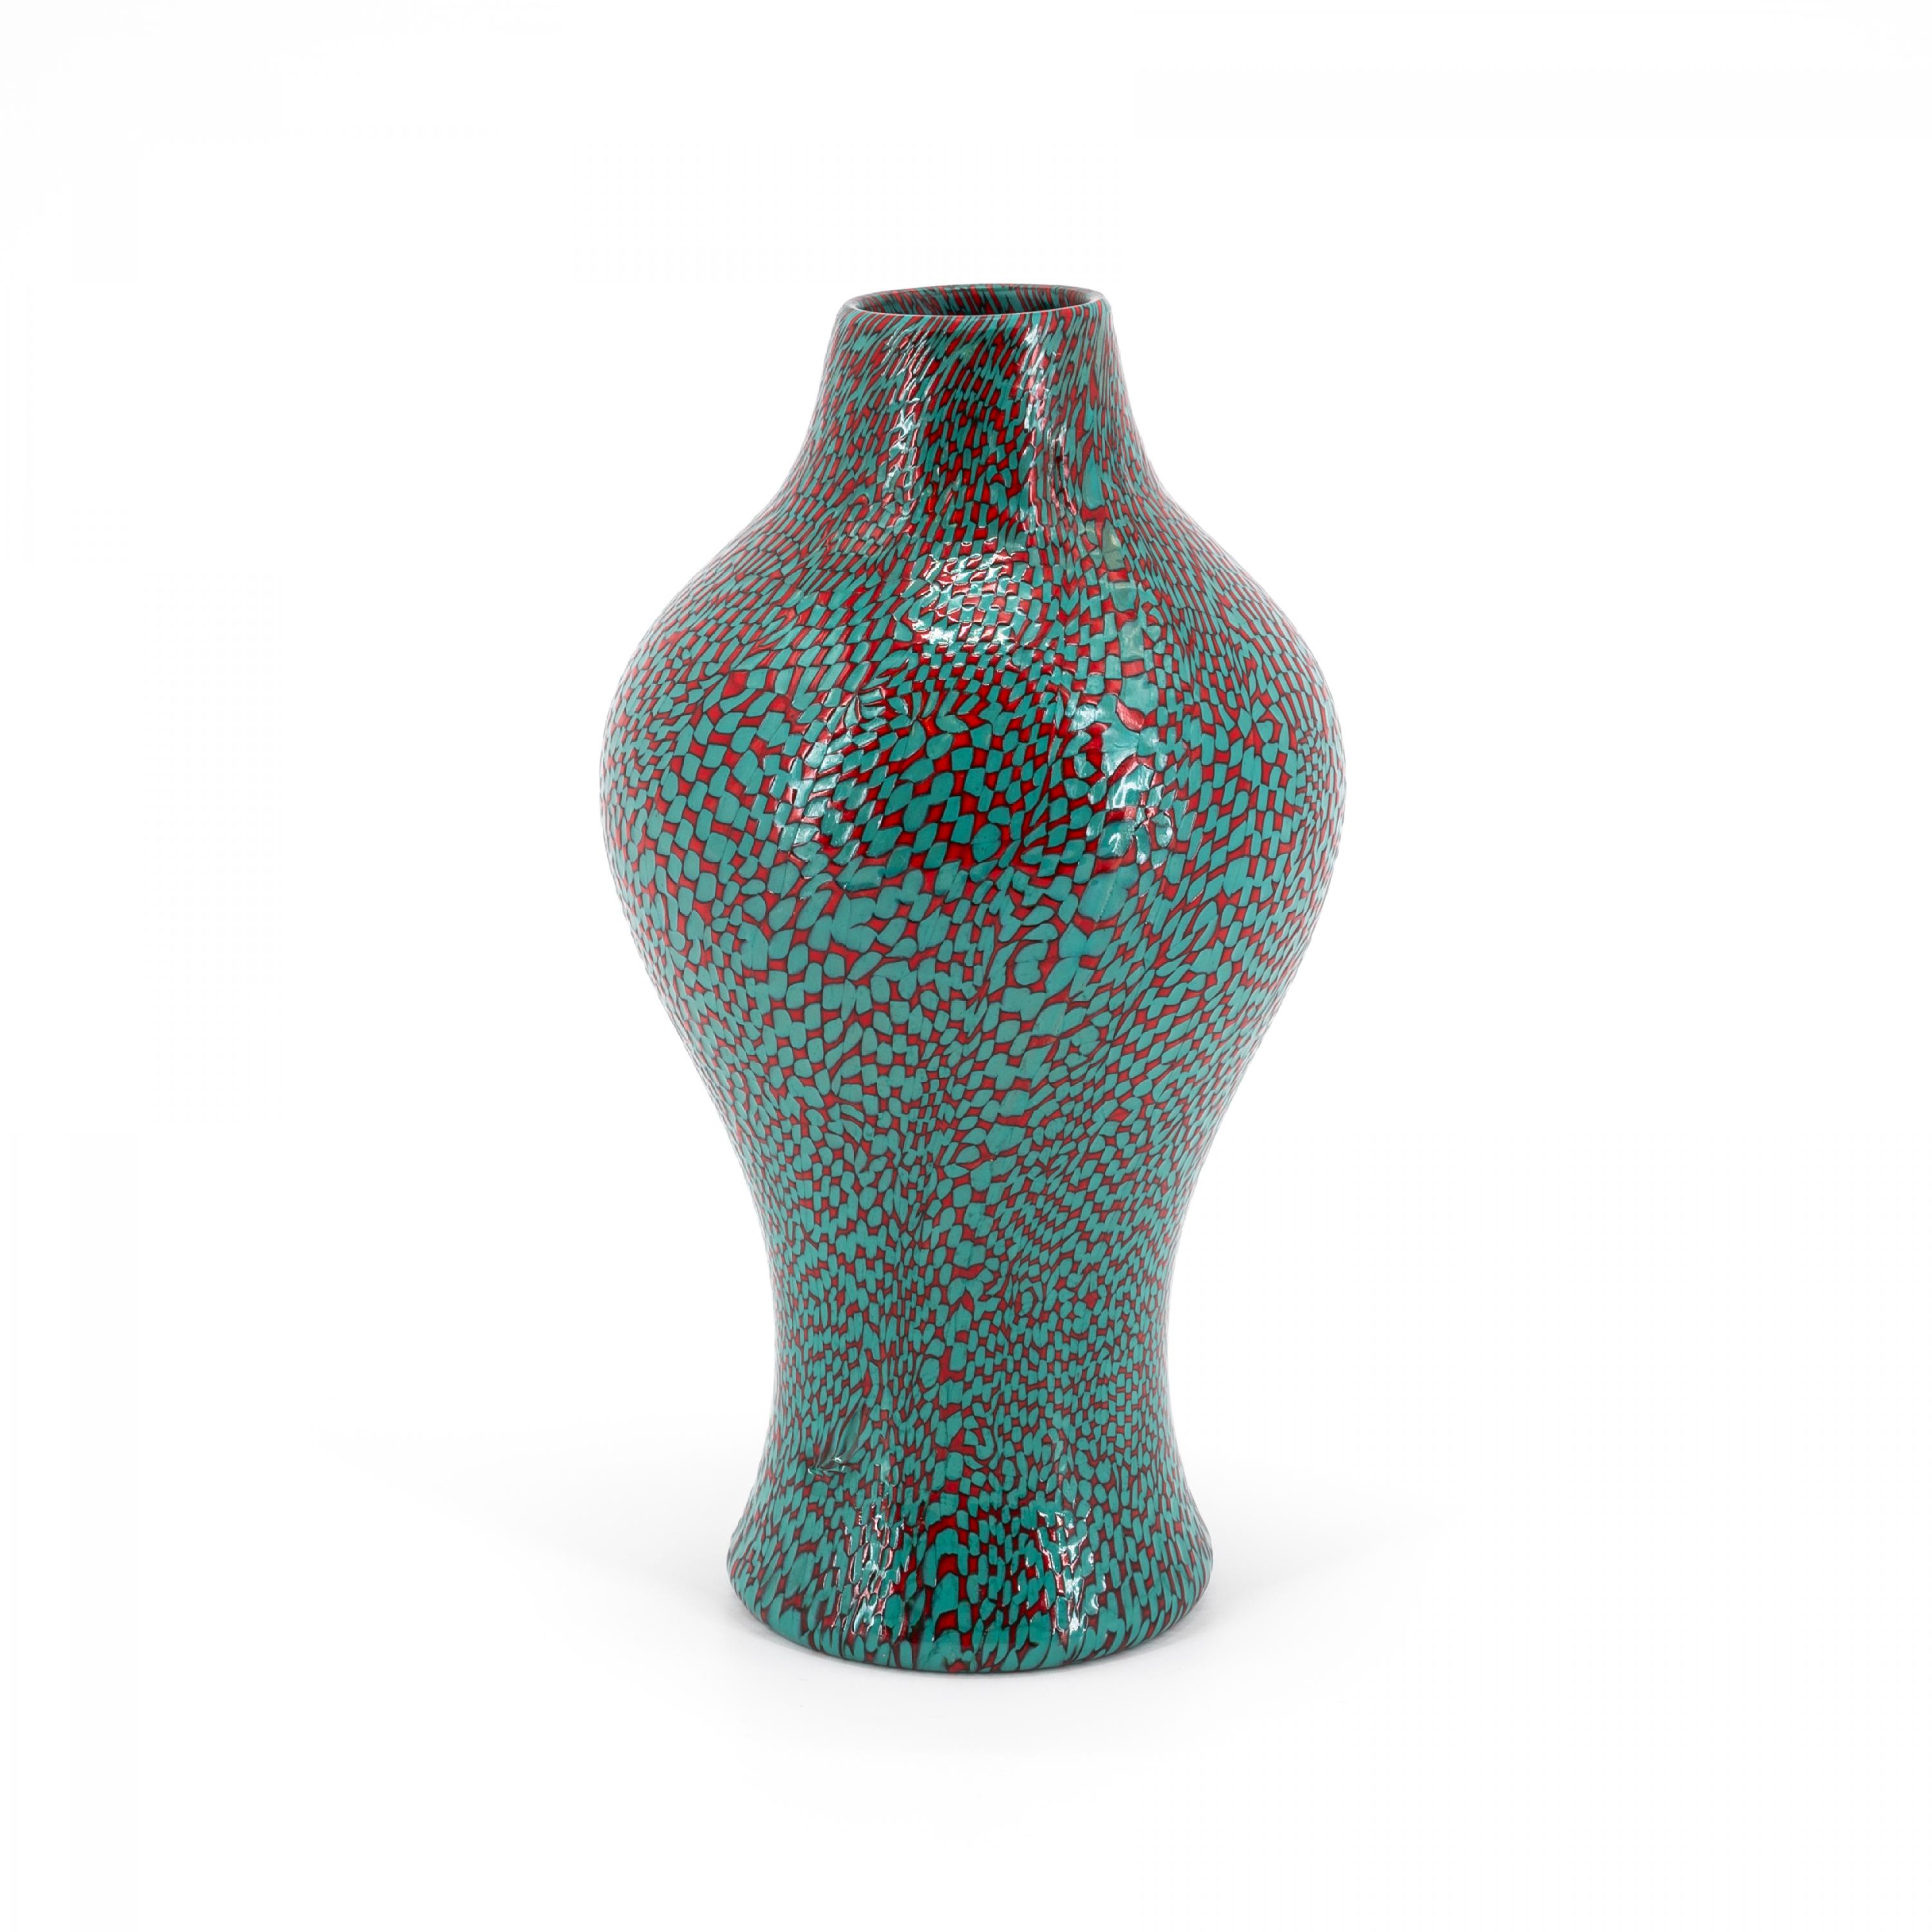 GLASS VASE WITH DeCOR 'A DAMA' - Image 2 of 7